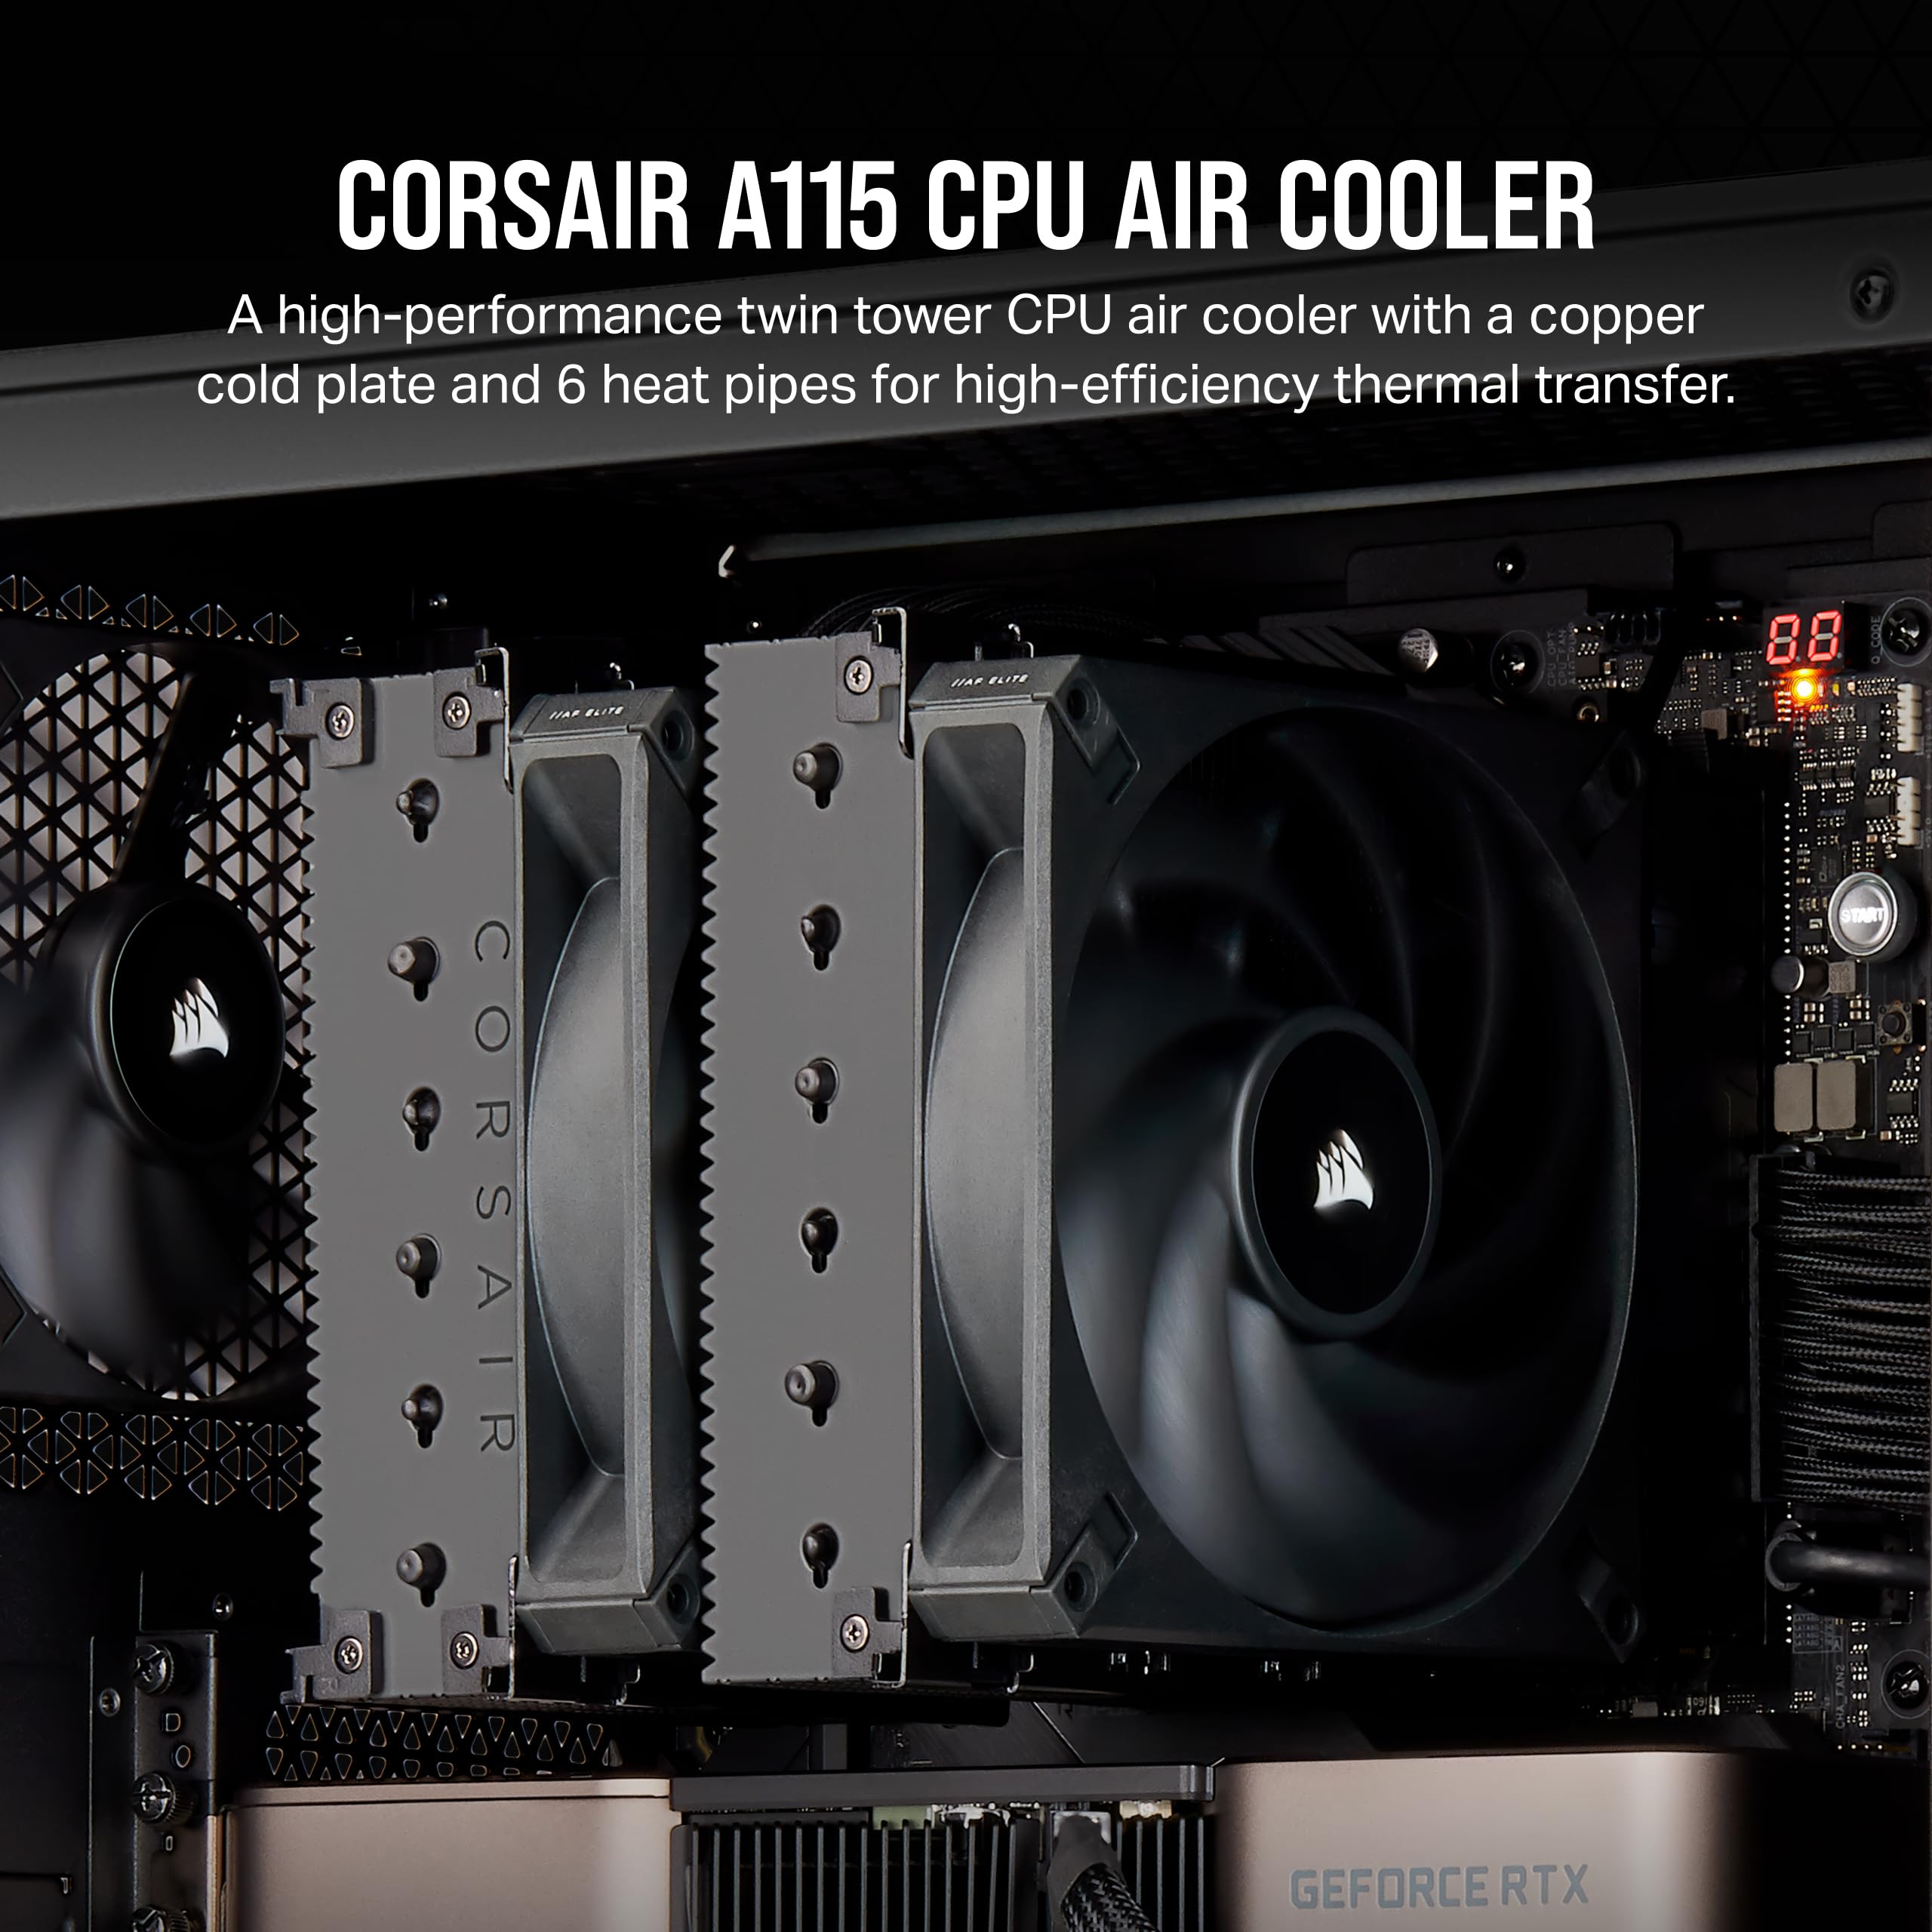 CORSAIR A115 High-Performance Tower CPU Air Cooler — Cools up to 270W TDP - Slide-and-Lock Fan Mount - Two Corsair AF140 Elite Fans - Easy to Install - Pre-Applied Thermal Paste — Black